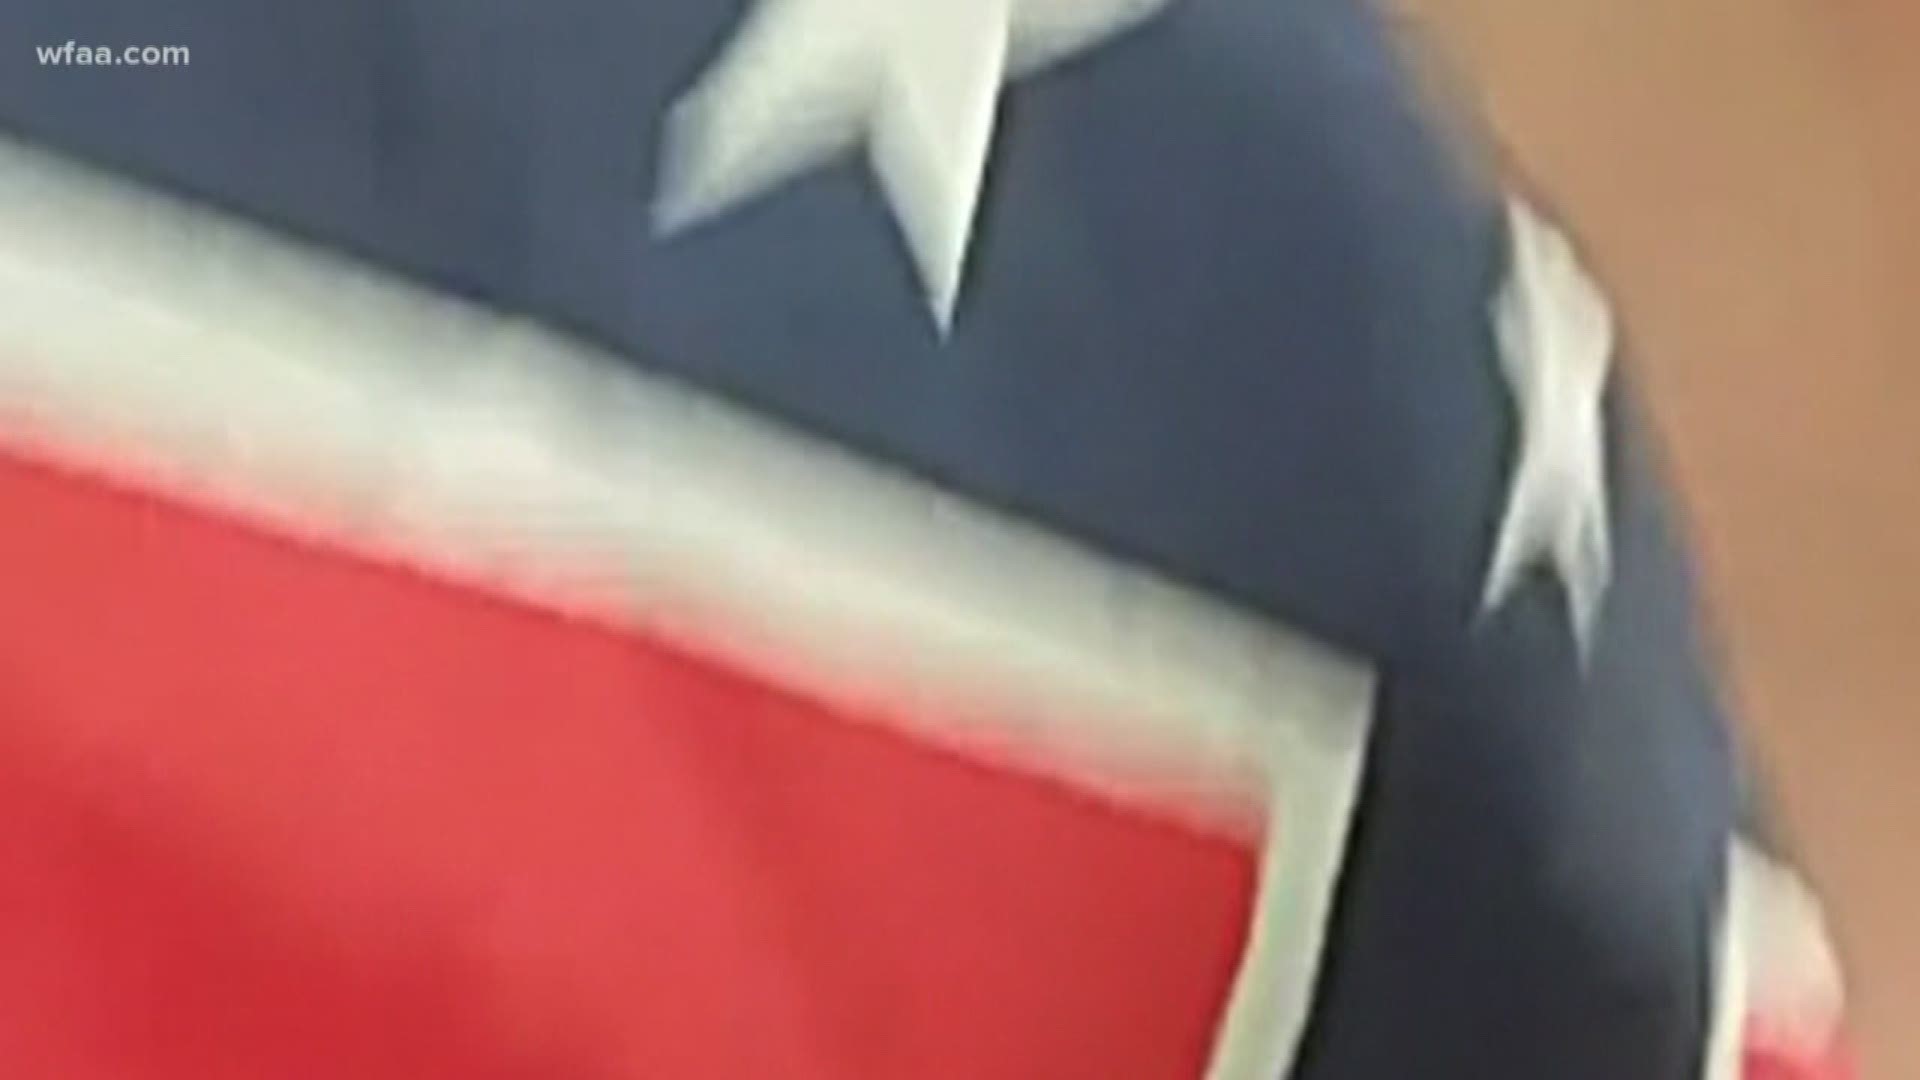 Royse City schools confiscated flag, but not before classmates say a student wore it multiple times throughout the day, despite demands from teachers to remove it.